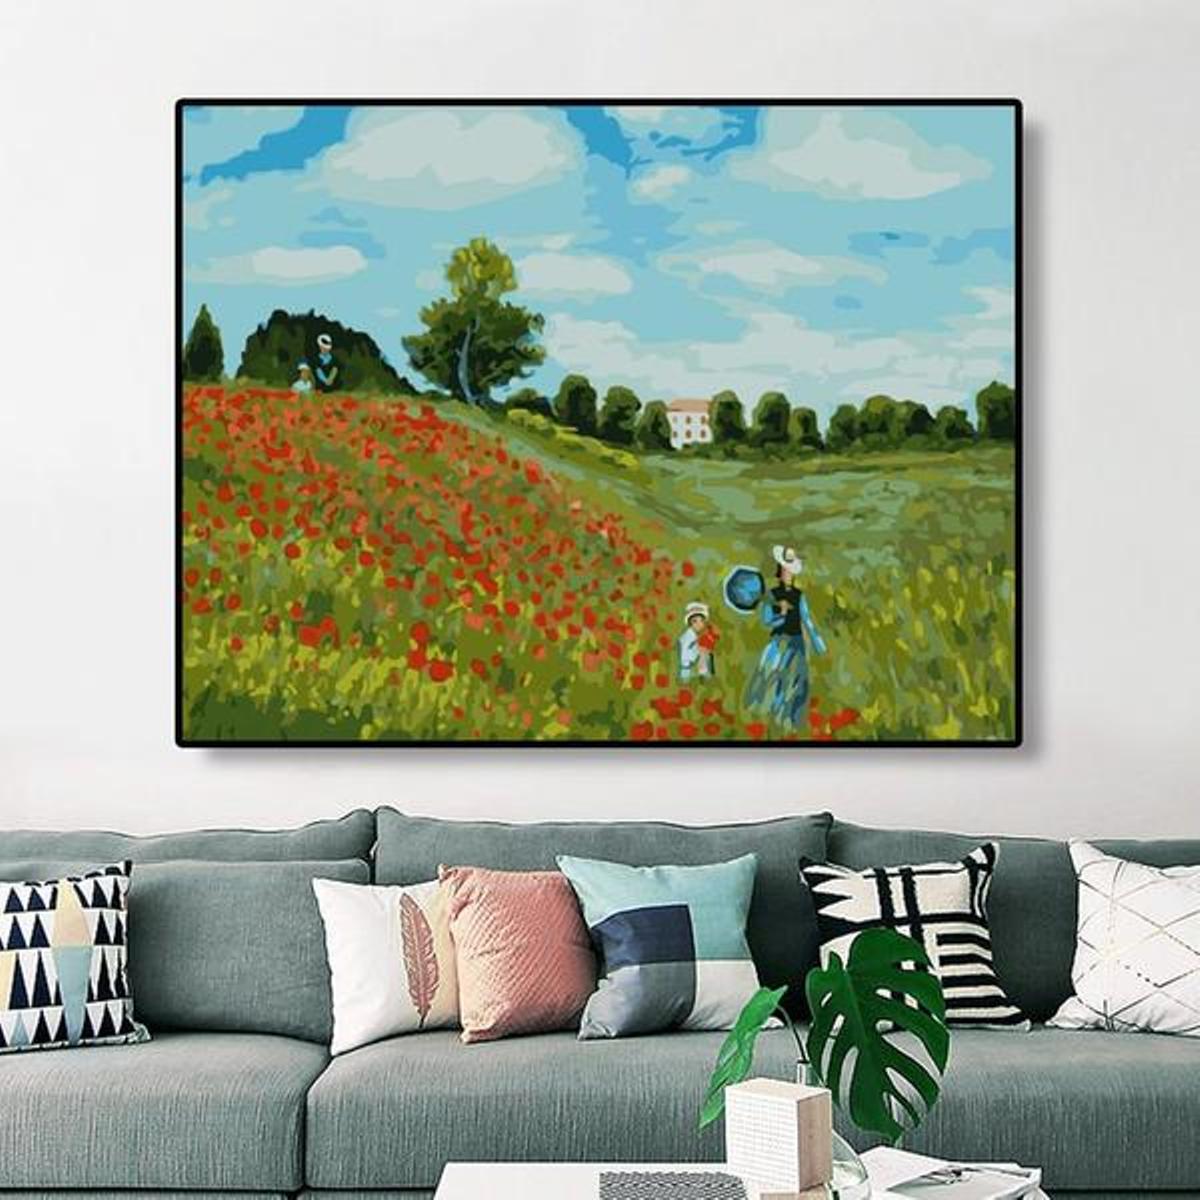 The Poppy Field near Argenteuil, 1873 by Claude Monet - Van-Go Paint-By-Number Kit